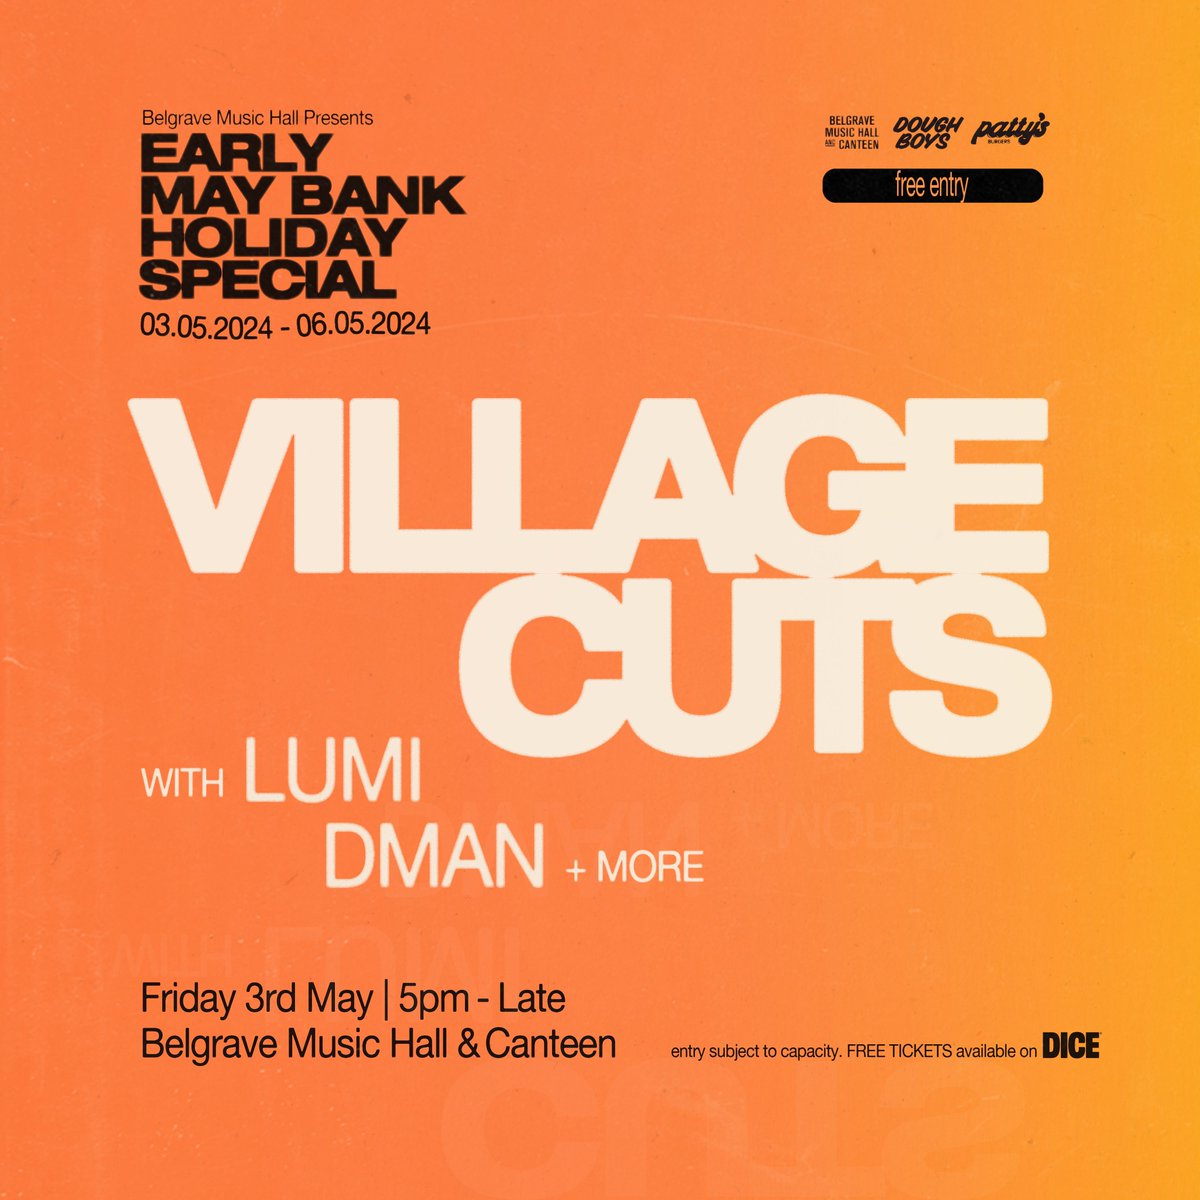 We kick off the May bank holiday with two of the hottest DJs, Village Cuts, making their way up from London for a massive night of music! Joining them on the night we have Endless City's Lumi as well as long standing Belgrave resident Dman on the controls til late! FREE ENTRY